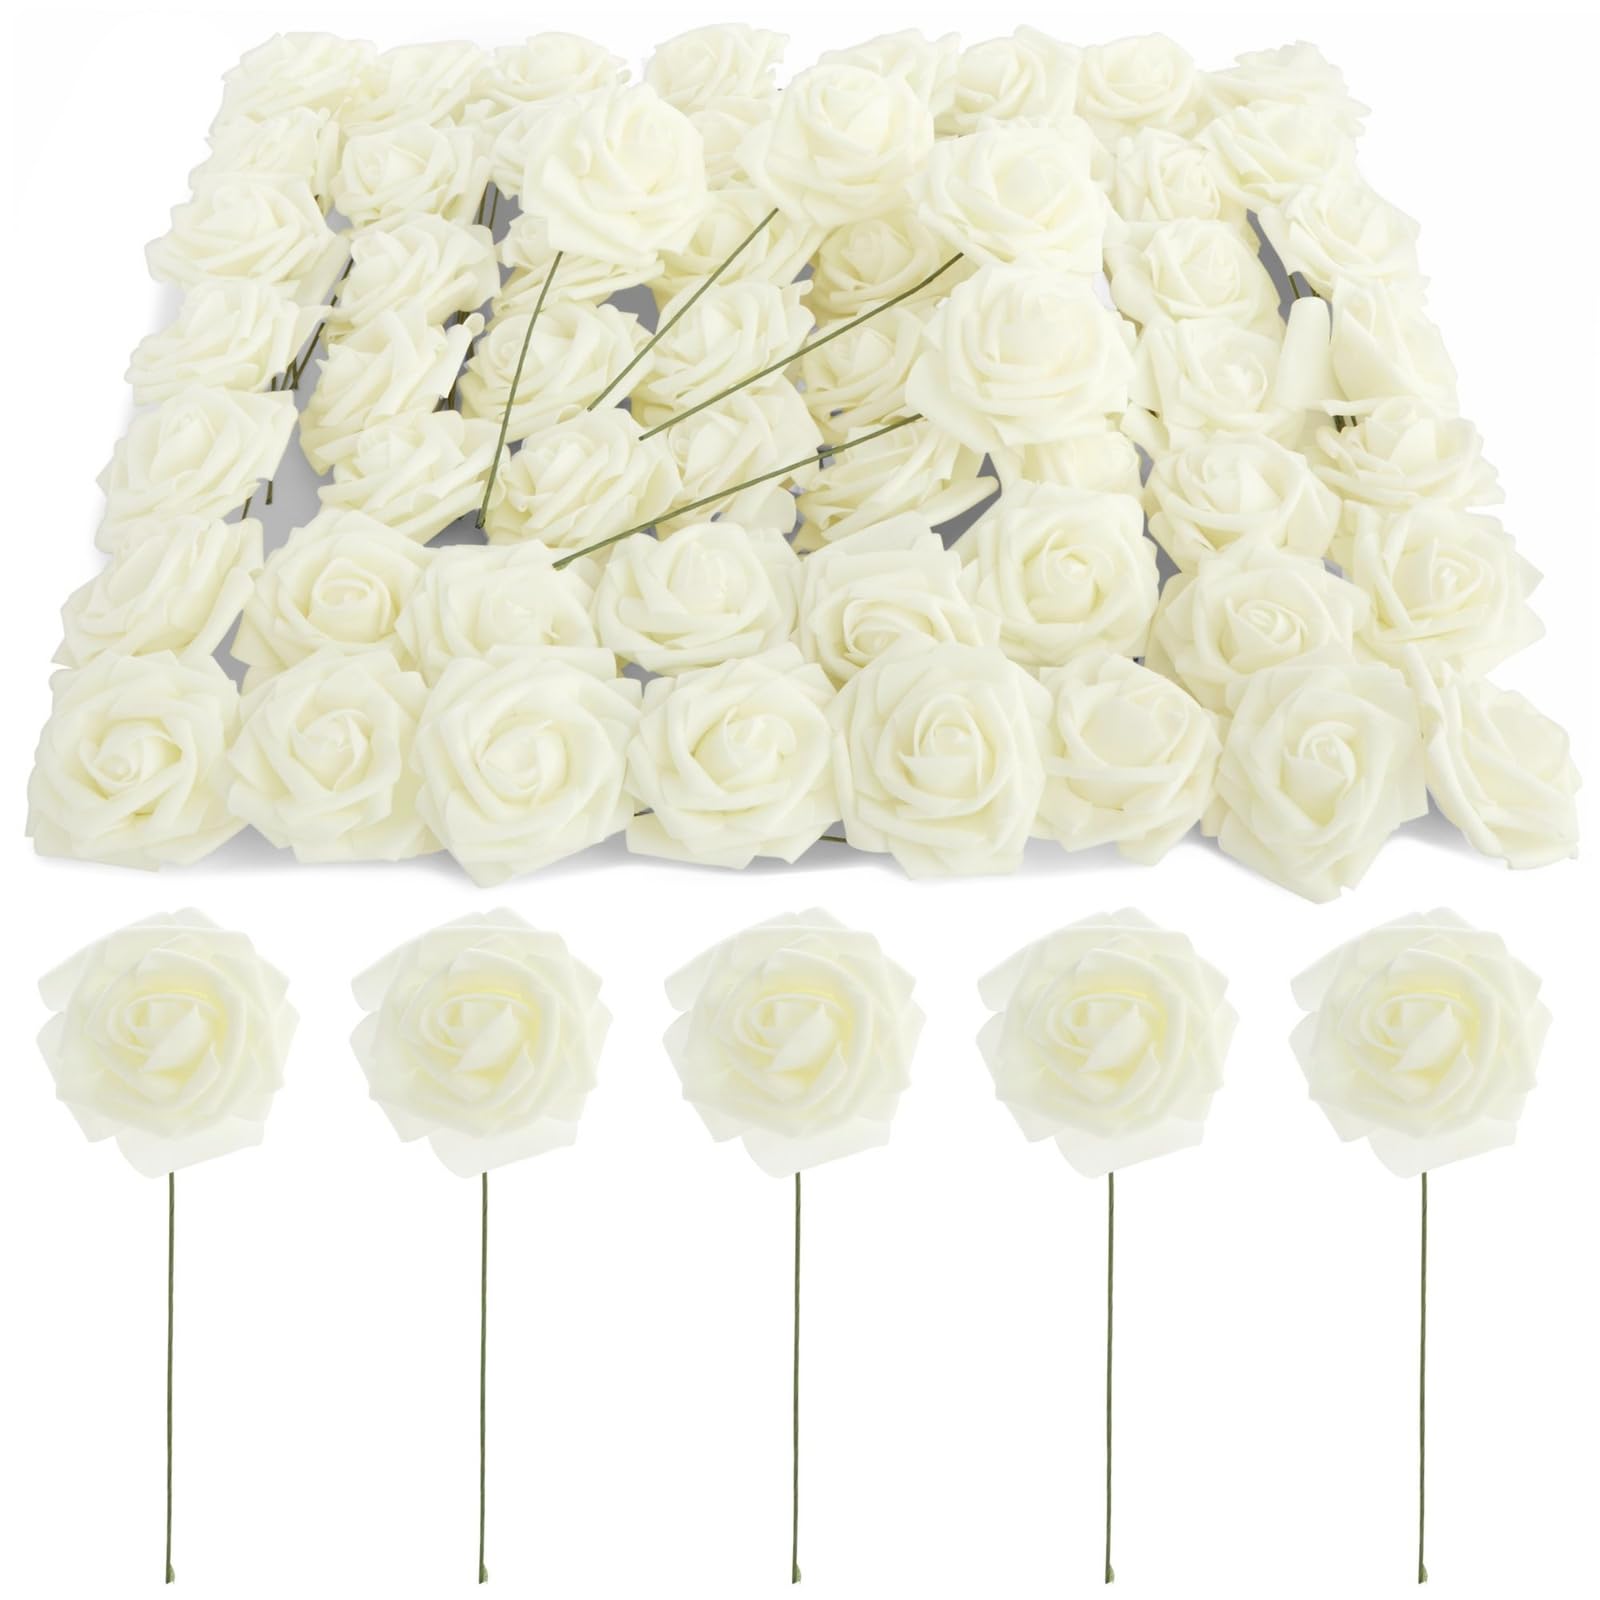 Bright Creations 60 Pack White Artificial Roses with Stems, Fake Faux Flowers Heads Bulk for Wedding Bouquets DIY & Bridal Shower, Cream, 3 inch